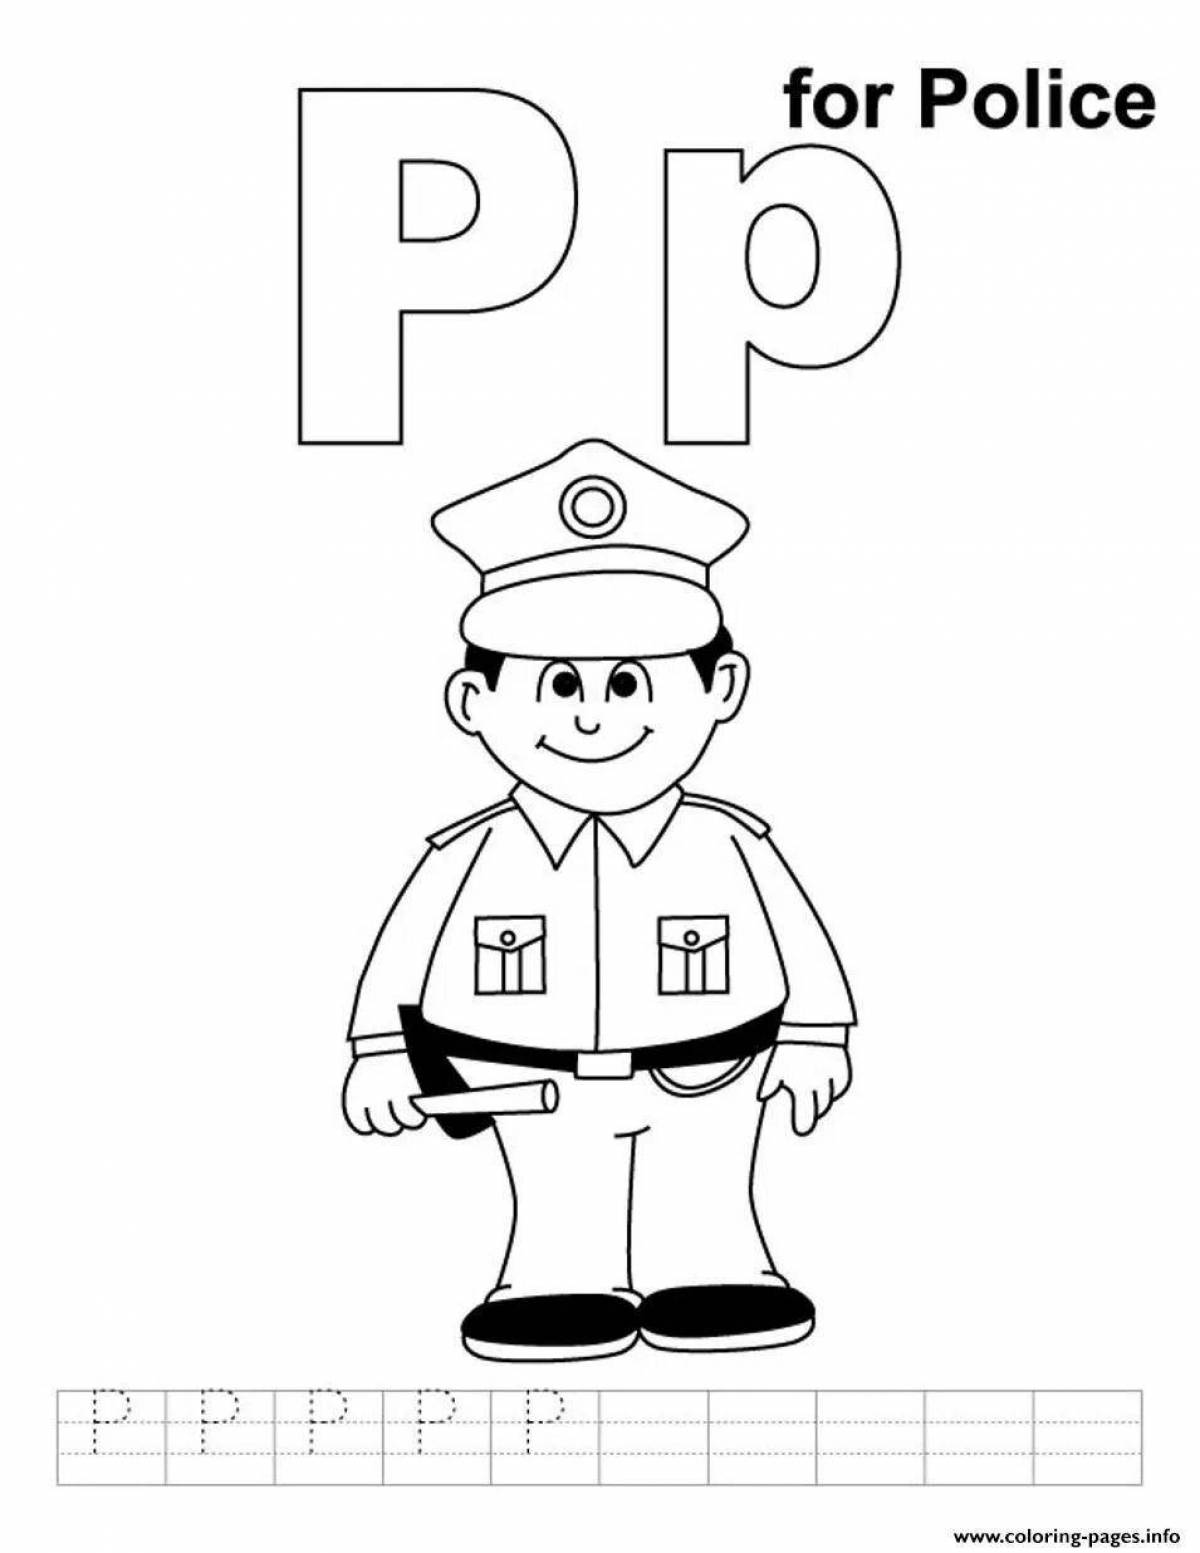 Coloring page charming police profession